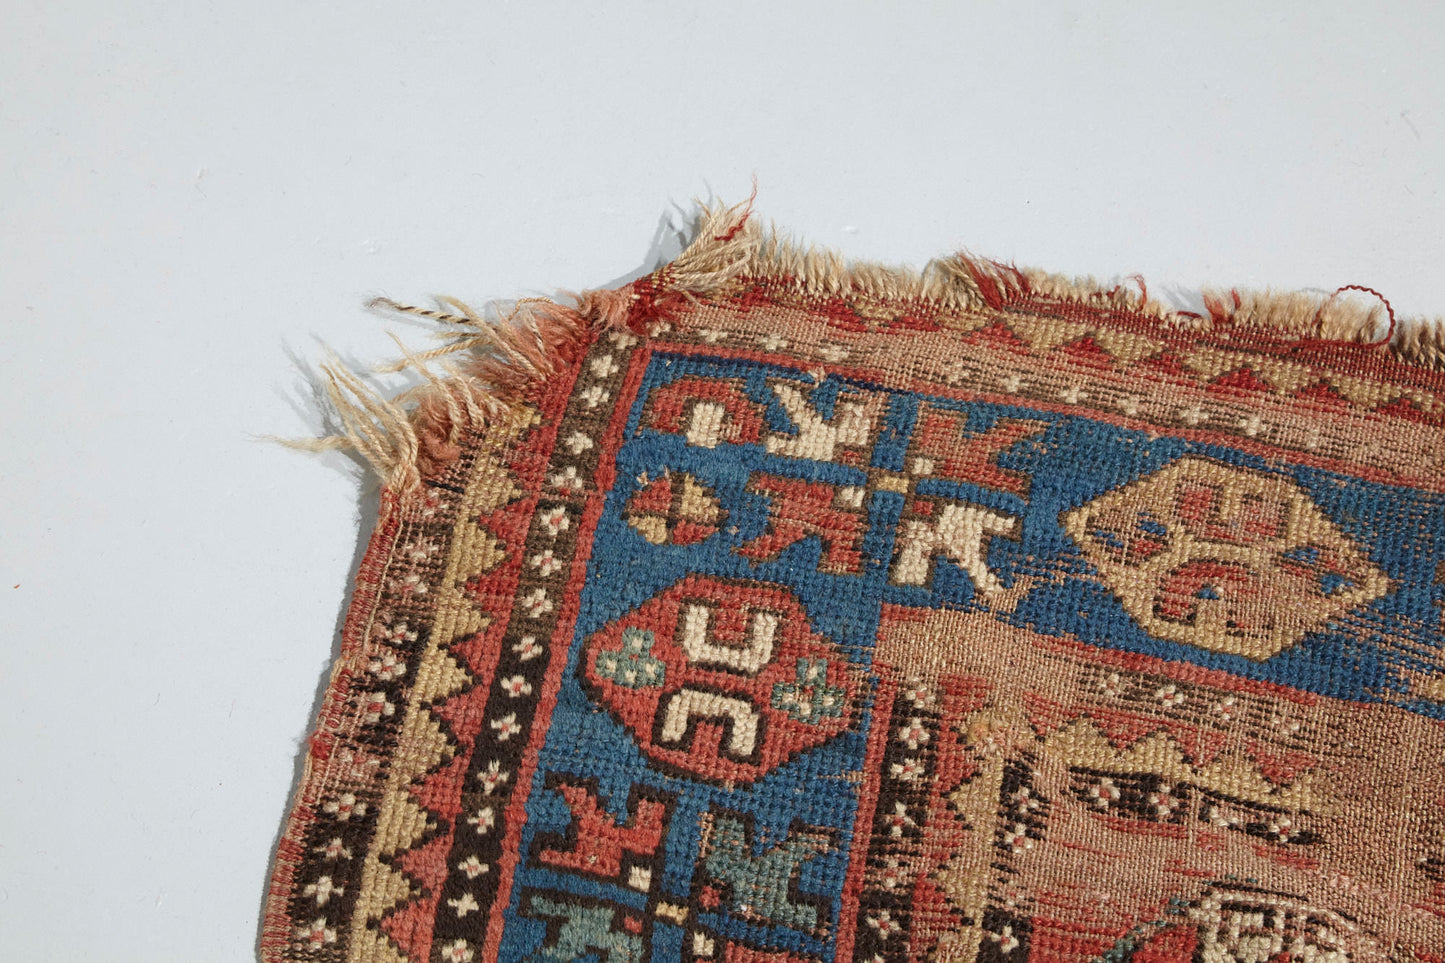 Corner detail of beautifully worn antique Kazak Persian Rug with red, blue and cream colors - Available from King Kennedy Rugs Los Angeles